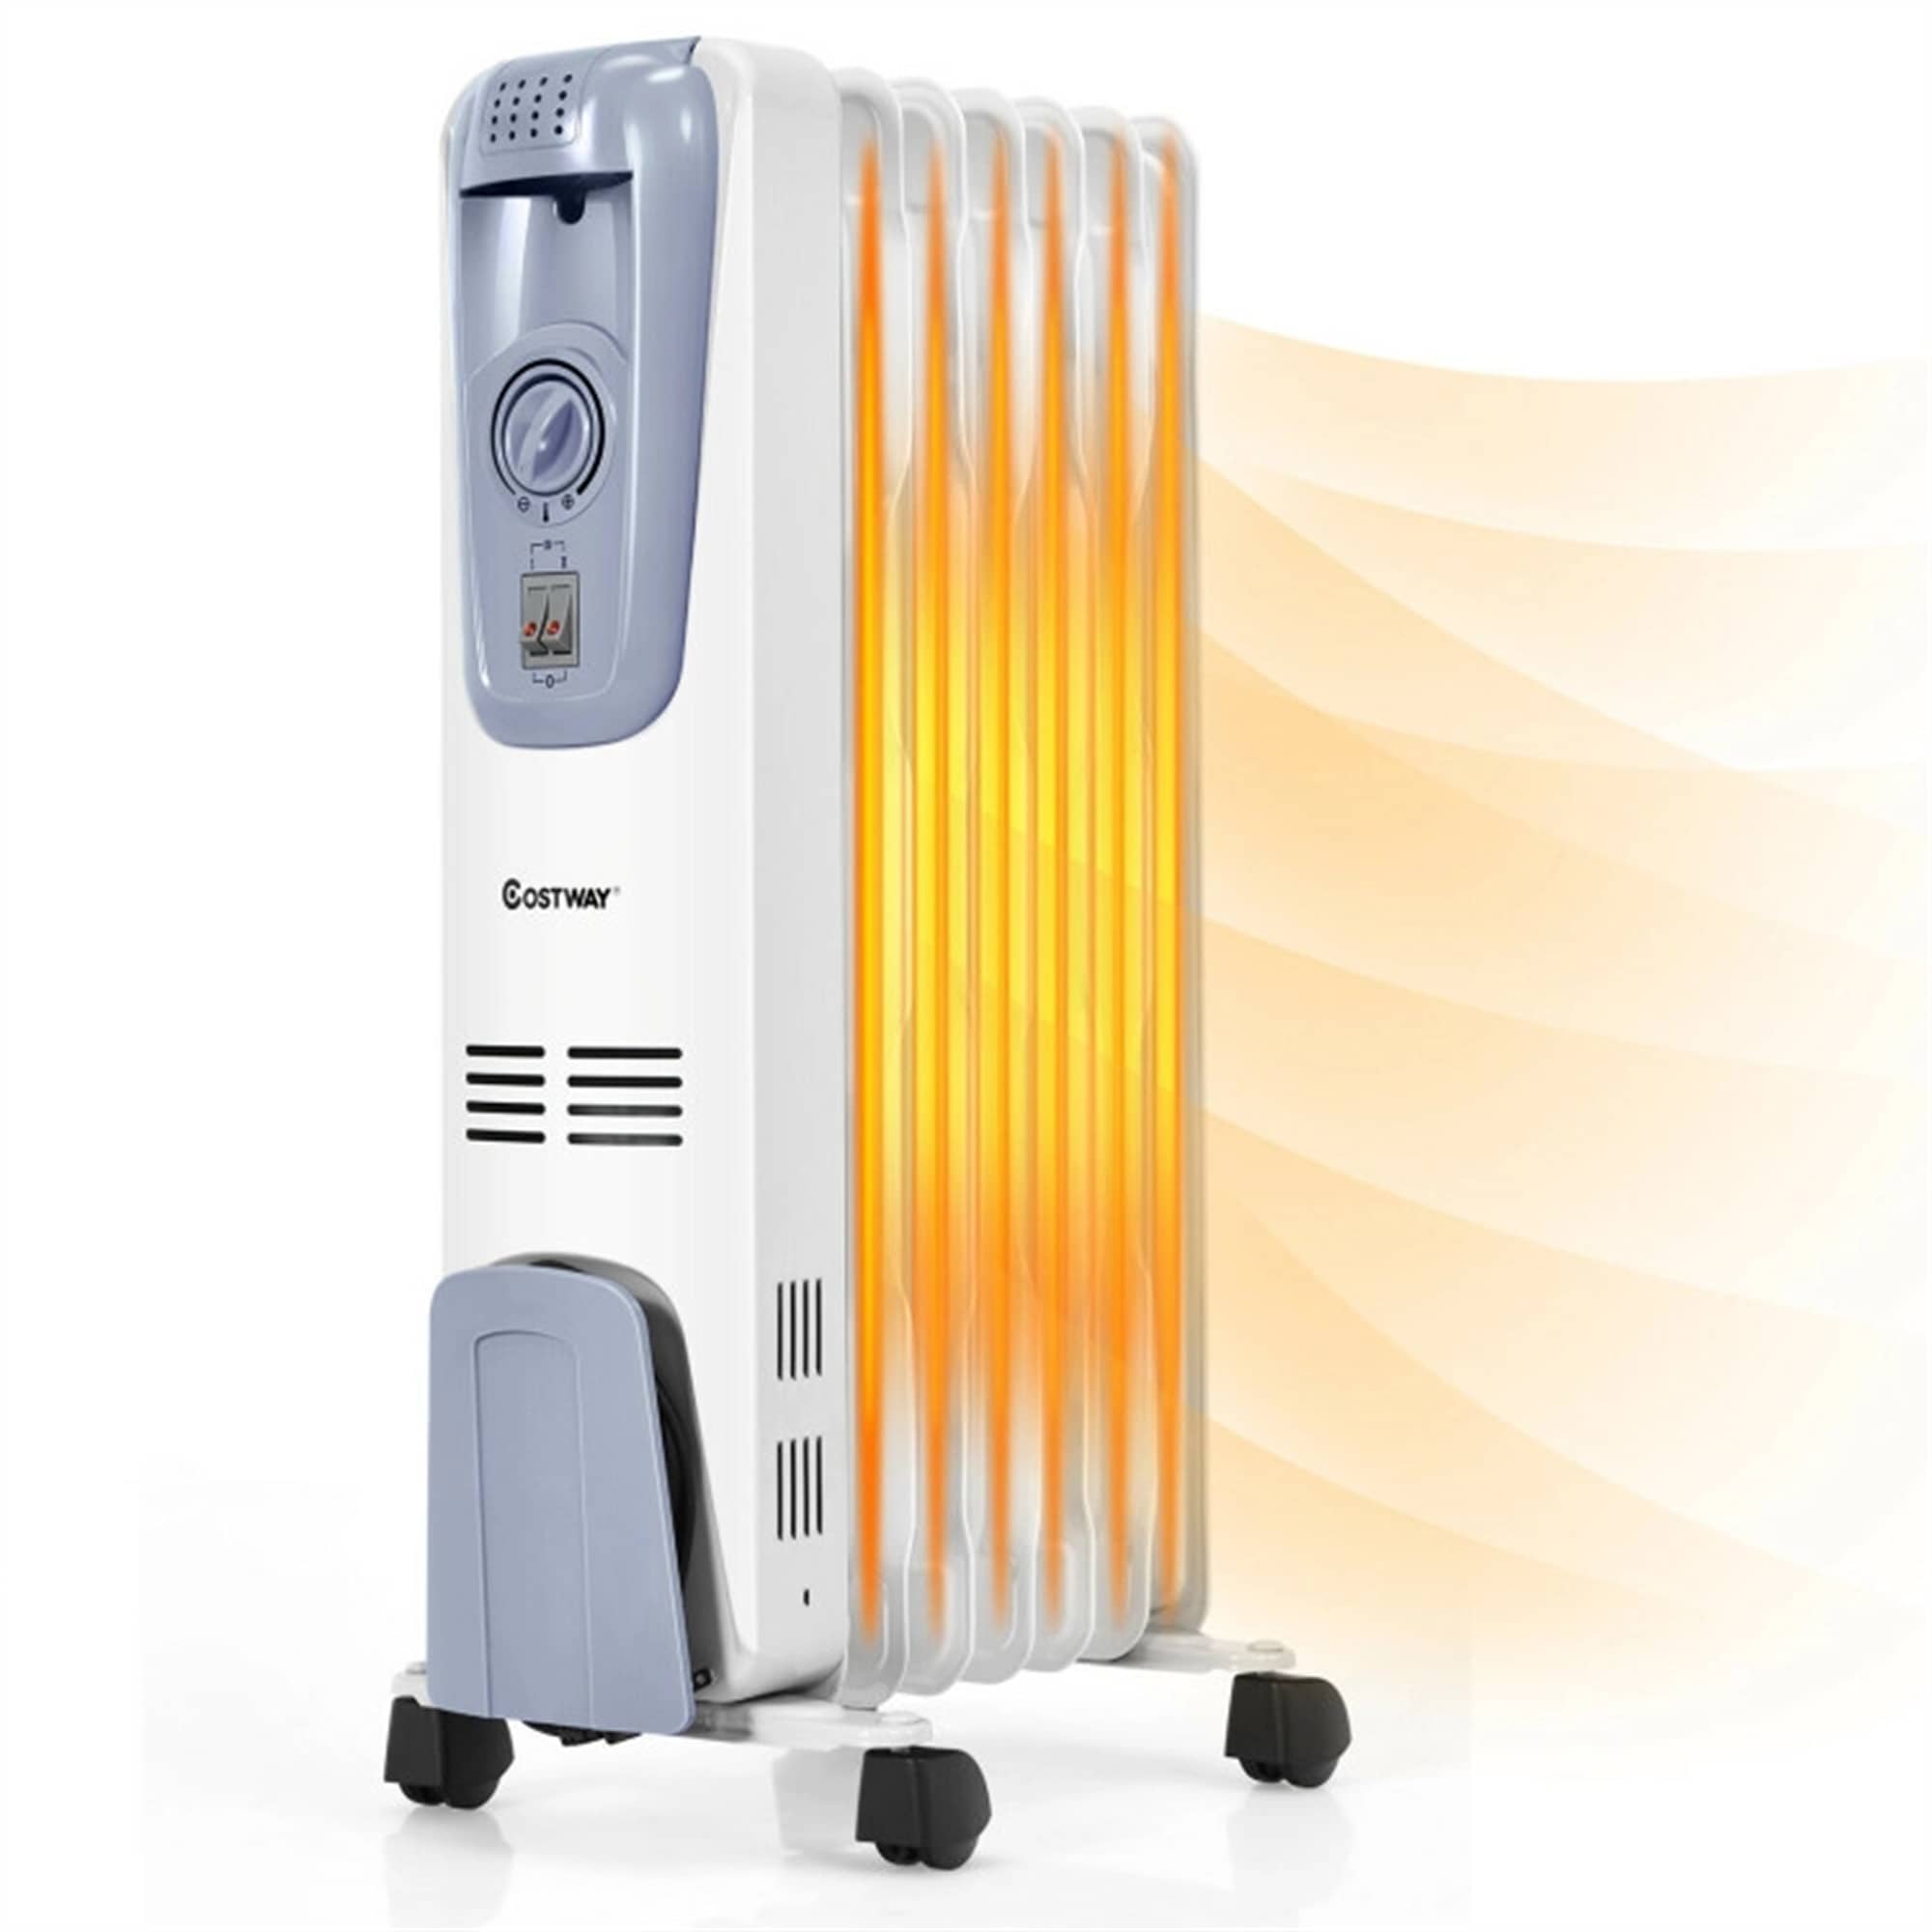 CASAINC 1500W Electric Space Heater Oil Filled Radiator Heater with Foldable Rack